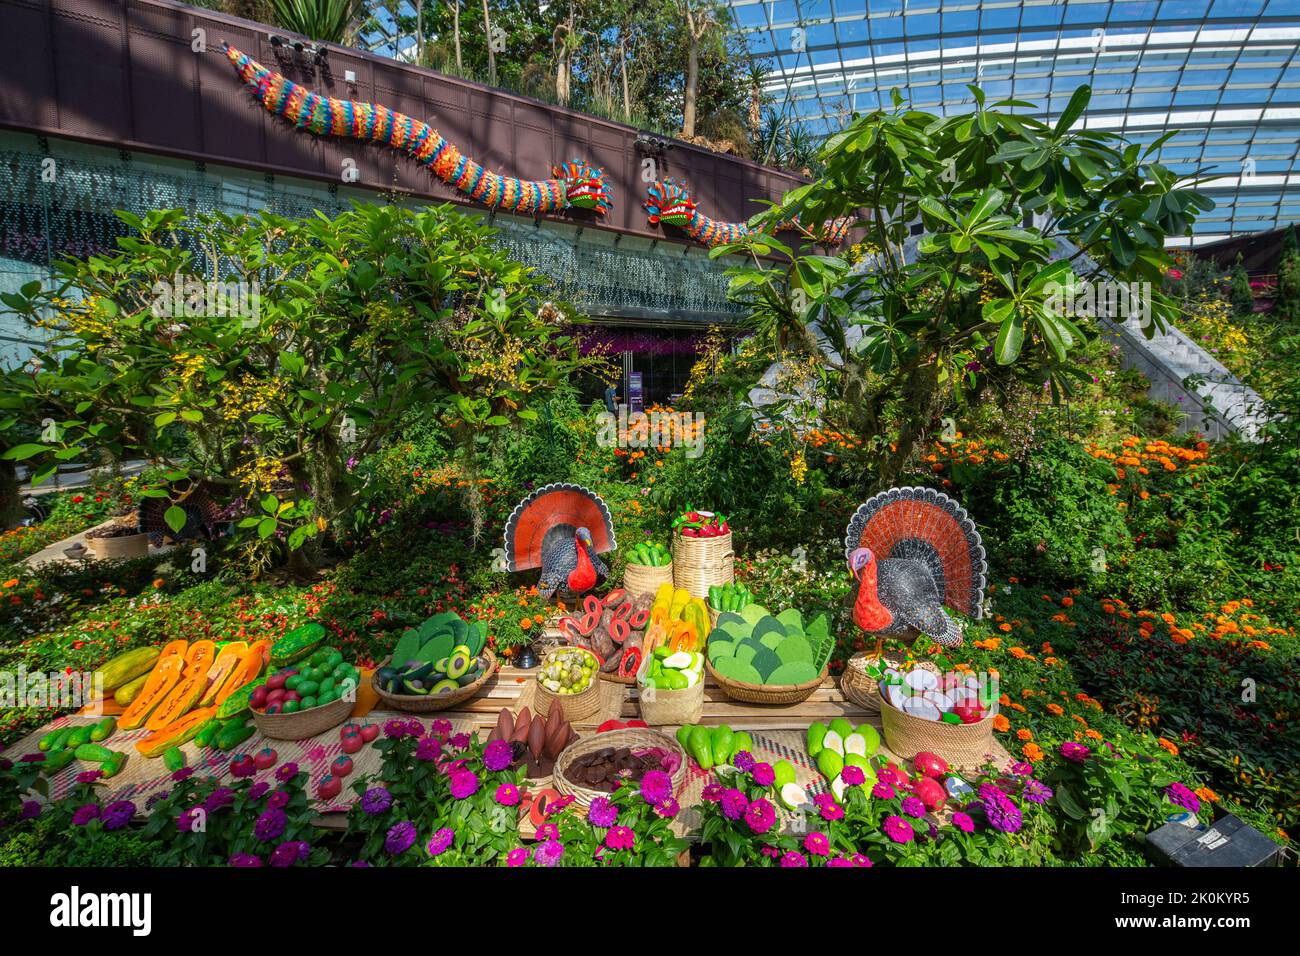 plants endemic to Mexico such as tomatoes, papaya, guava are displayed in the Mexico heritage and cultural Gardens by the Bay. Singapore. Stock Photo